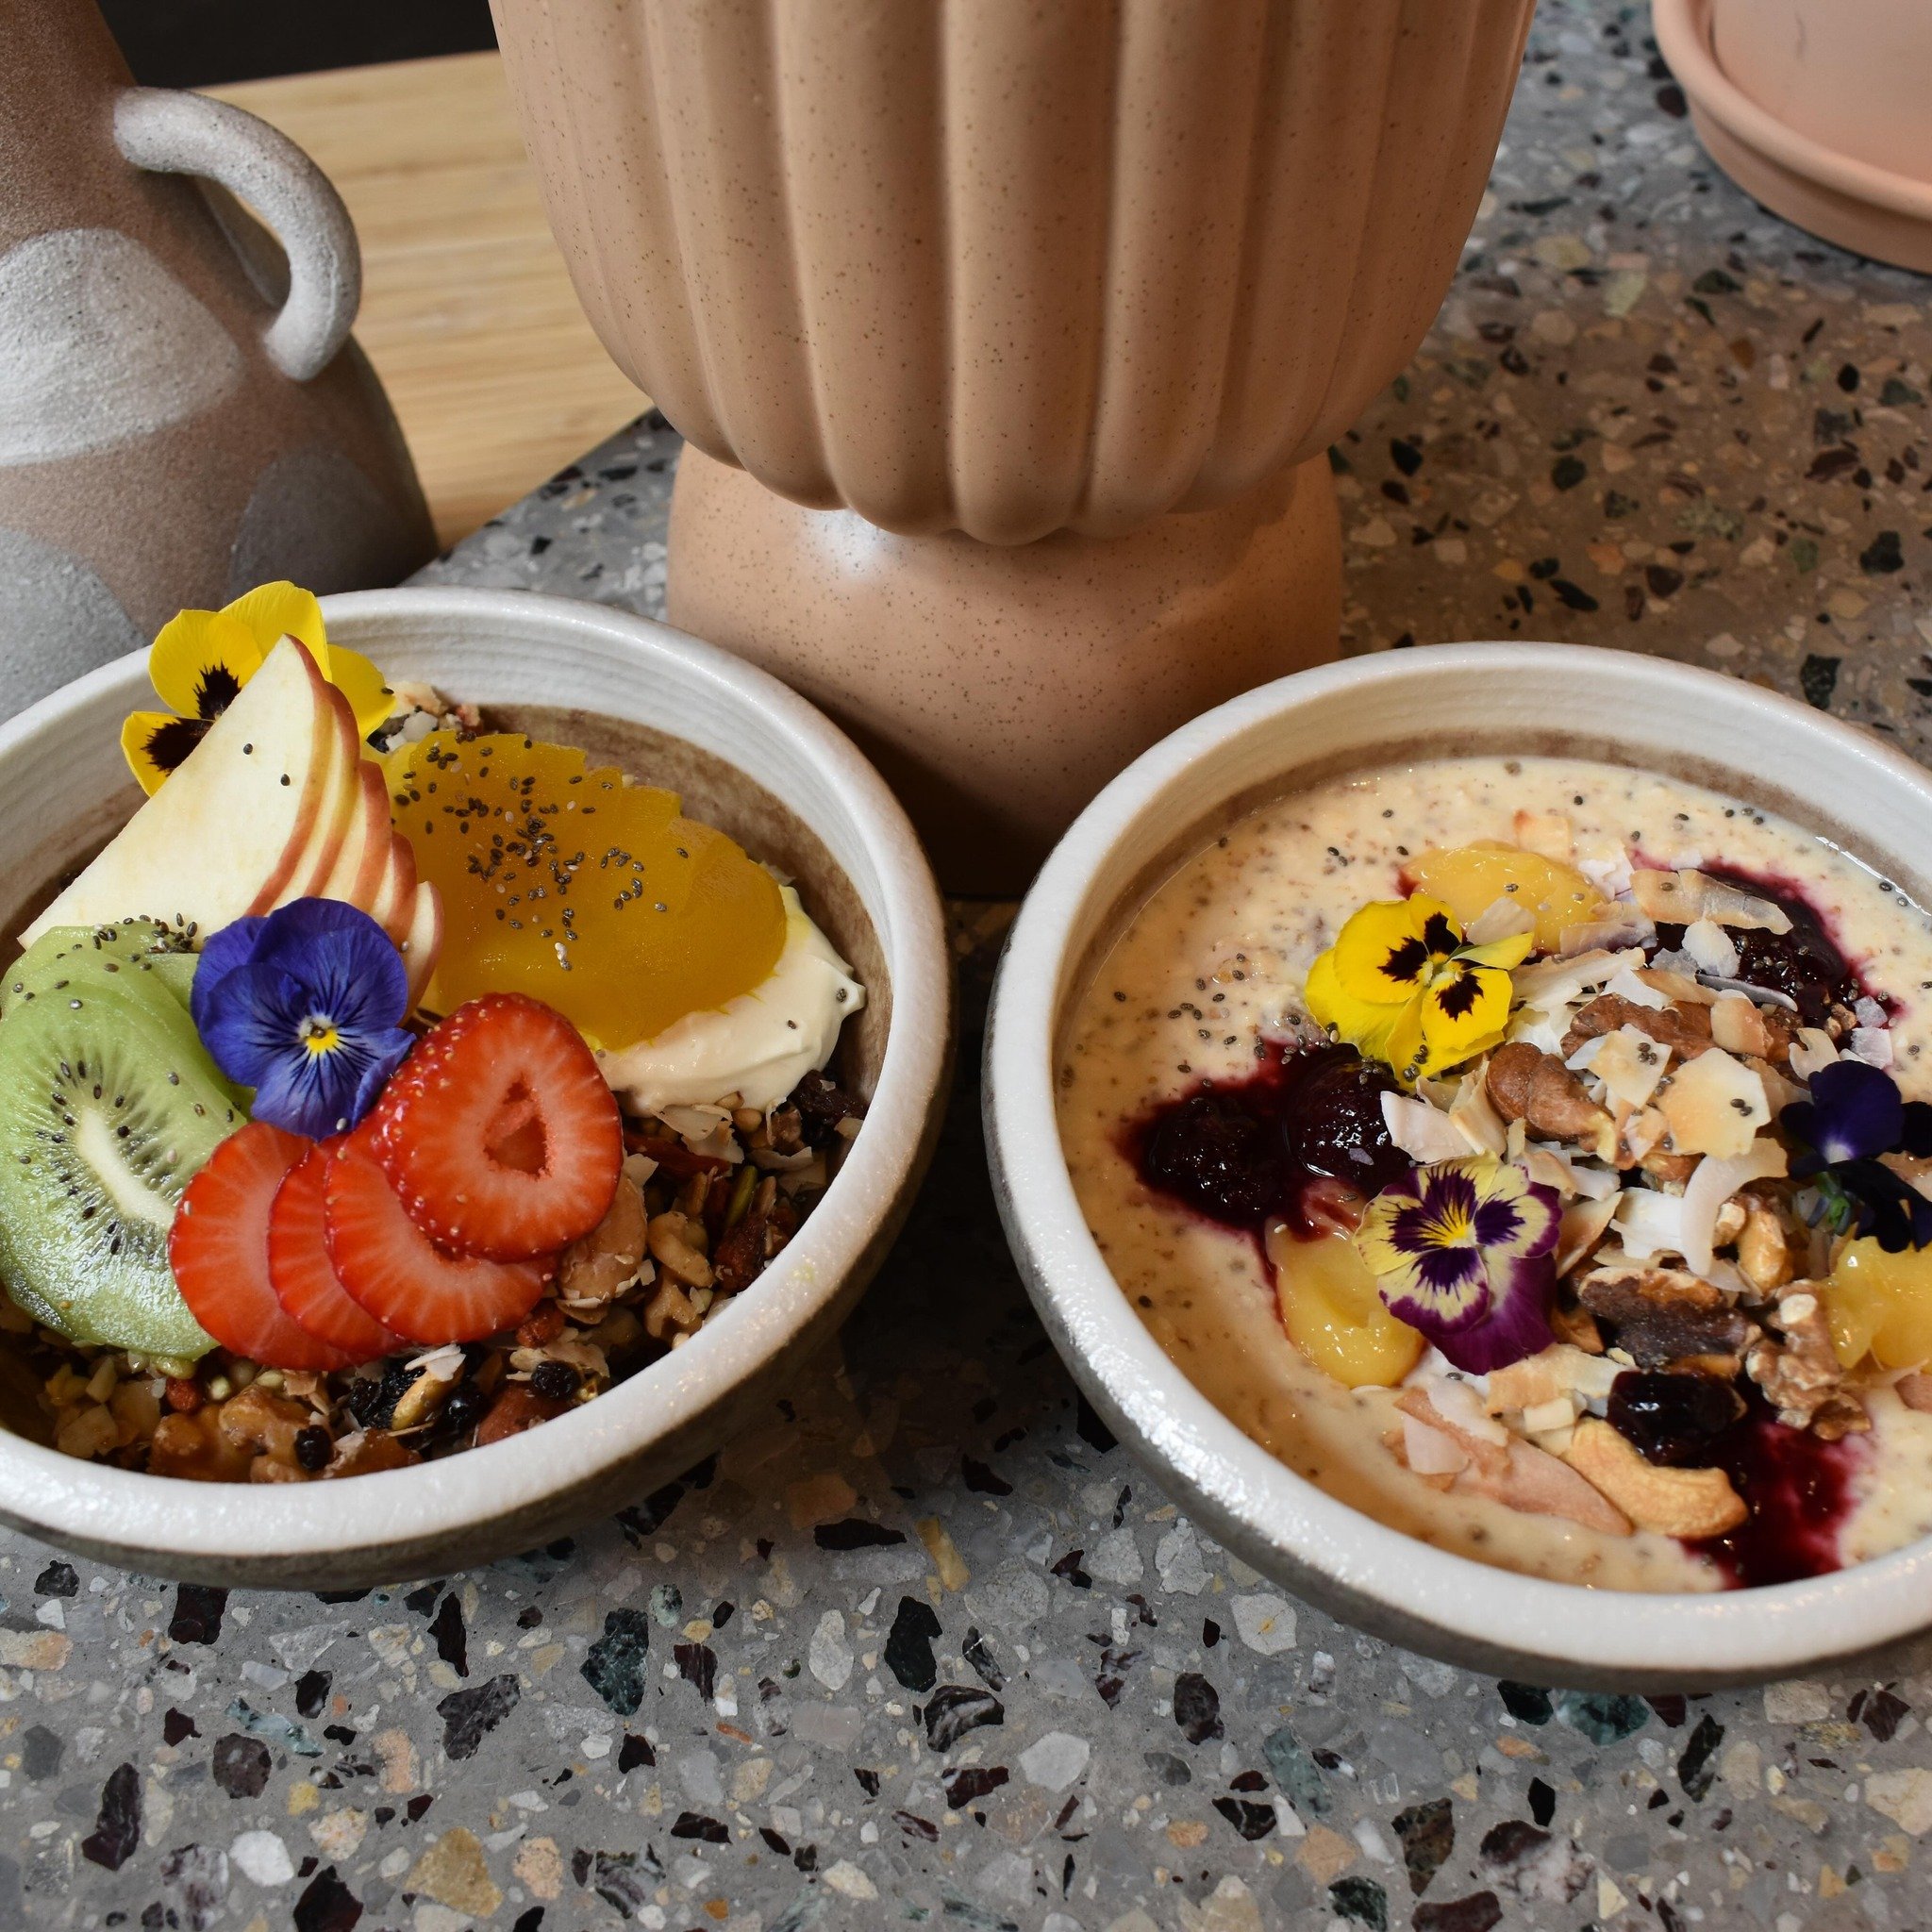 We&rsquo;ve got a poll going on over at @littlebbybrunoandco 💛

Nutty Granola or Bircher Muesli? Which outrageously tasty dish will win the coveted prize? Head over to cast your vote*. 🩷

*And, yes. You can vote for both. 😄